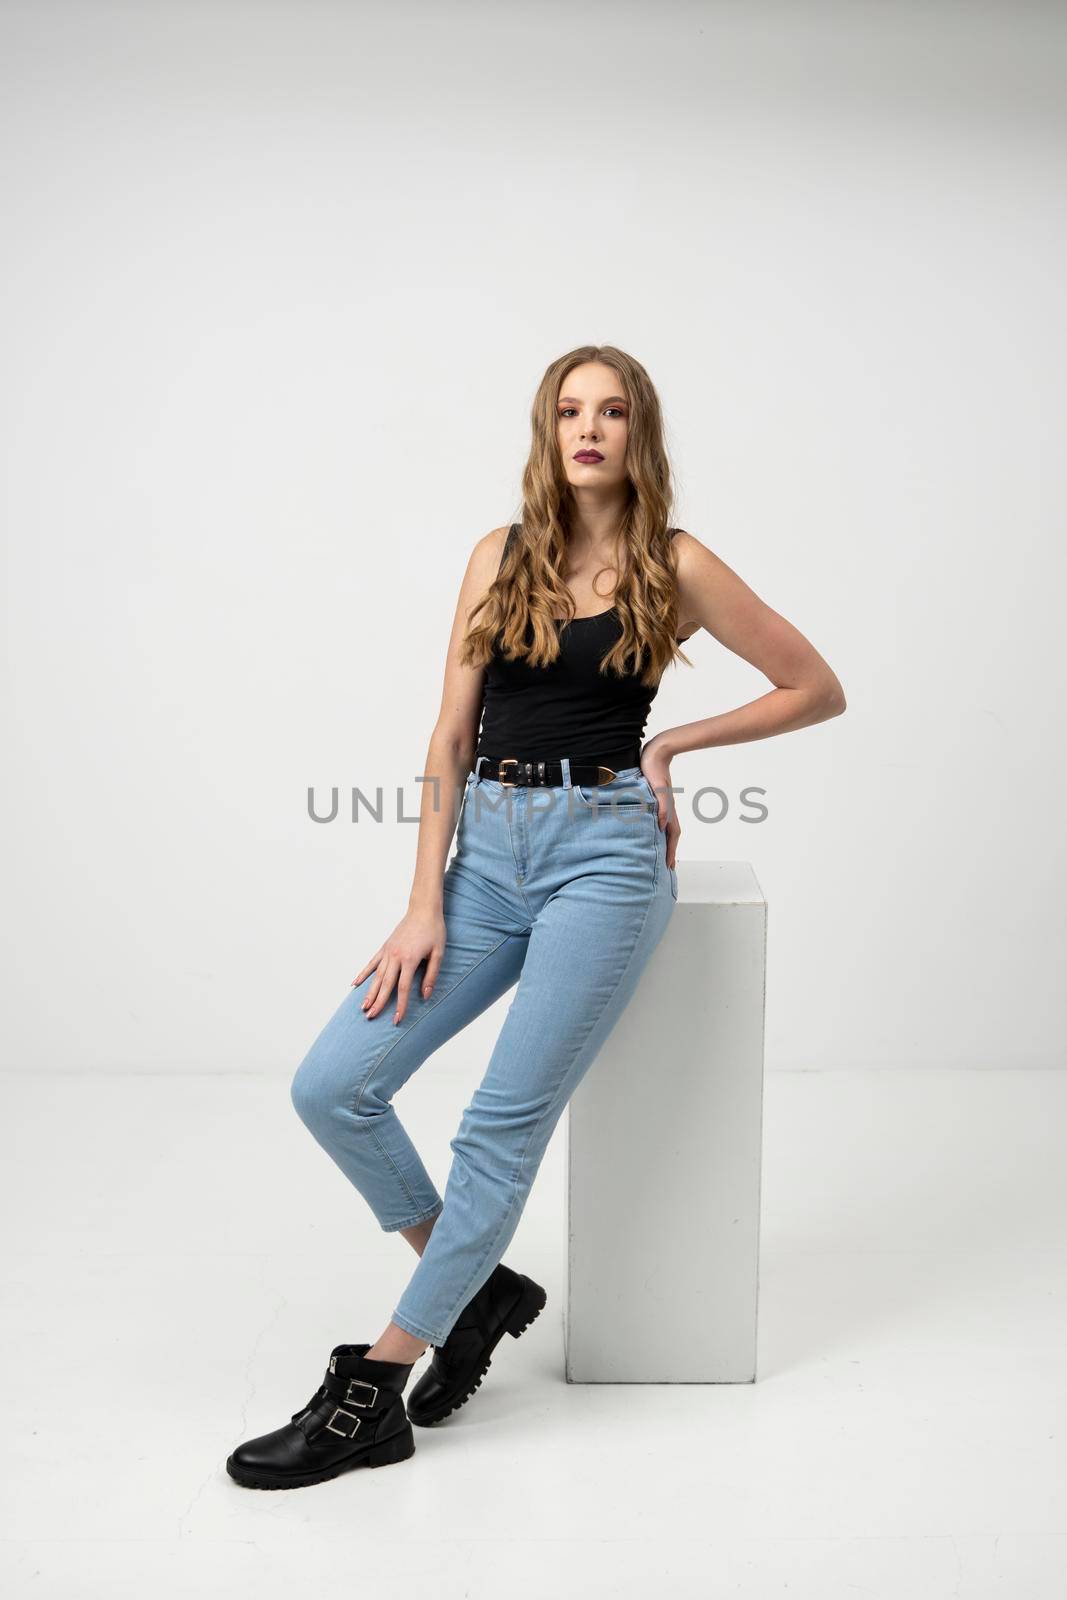 Beautiful young woman portrait in a black t-shirt and blue jeans. Studio shot, isolated on gray background. by vovsht